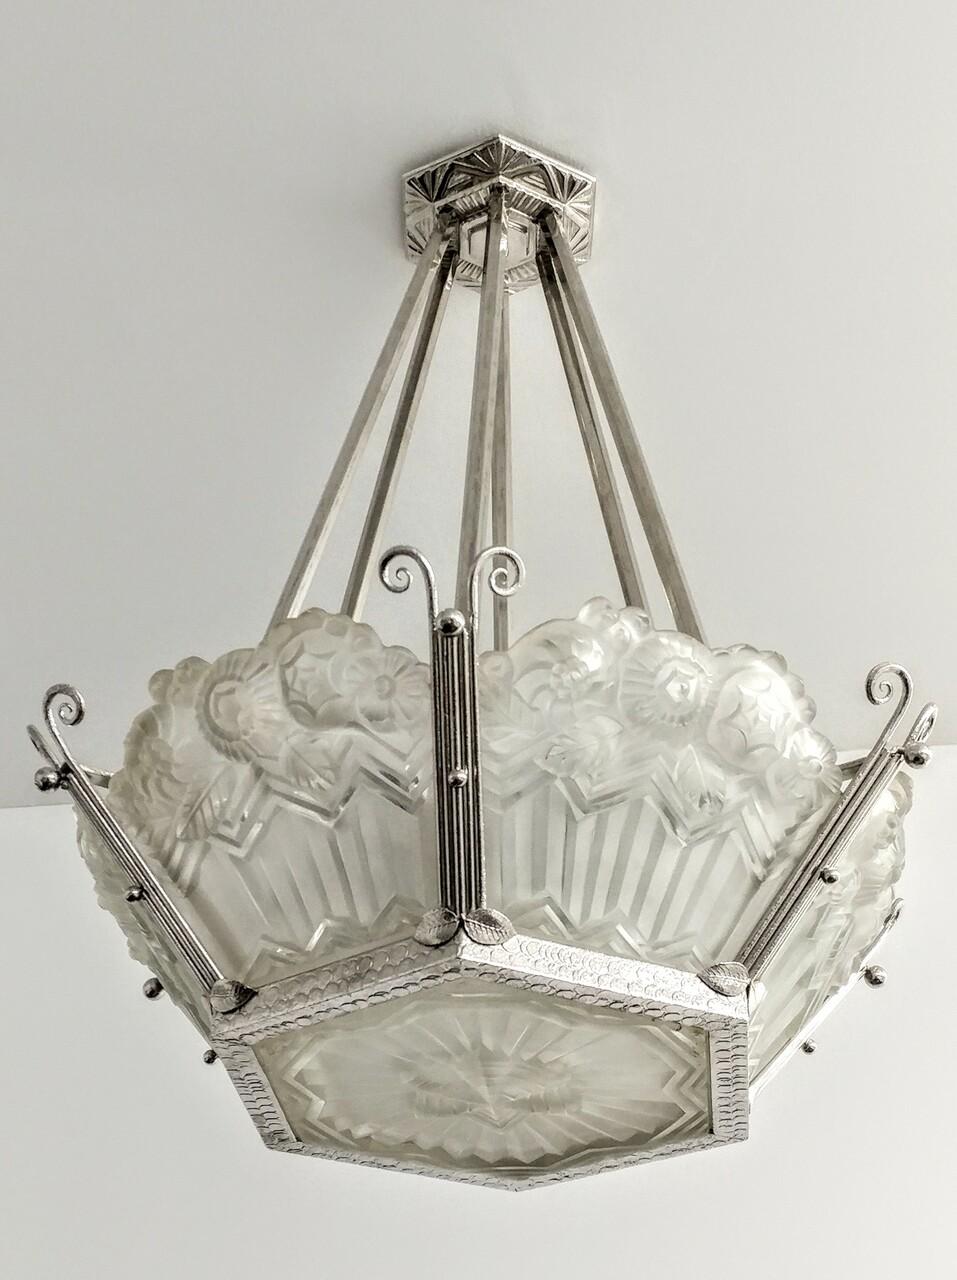 A French Art Deco chandelier by the French Artist Jean Noverdy. Six shades with matching hexagonal center coupe in clear frosted glass with intricate flowers with geometric motif details. Supported by a nickeled wrought iron frame. Chandelier has